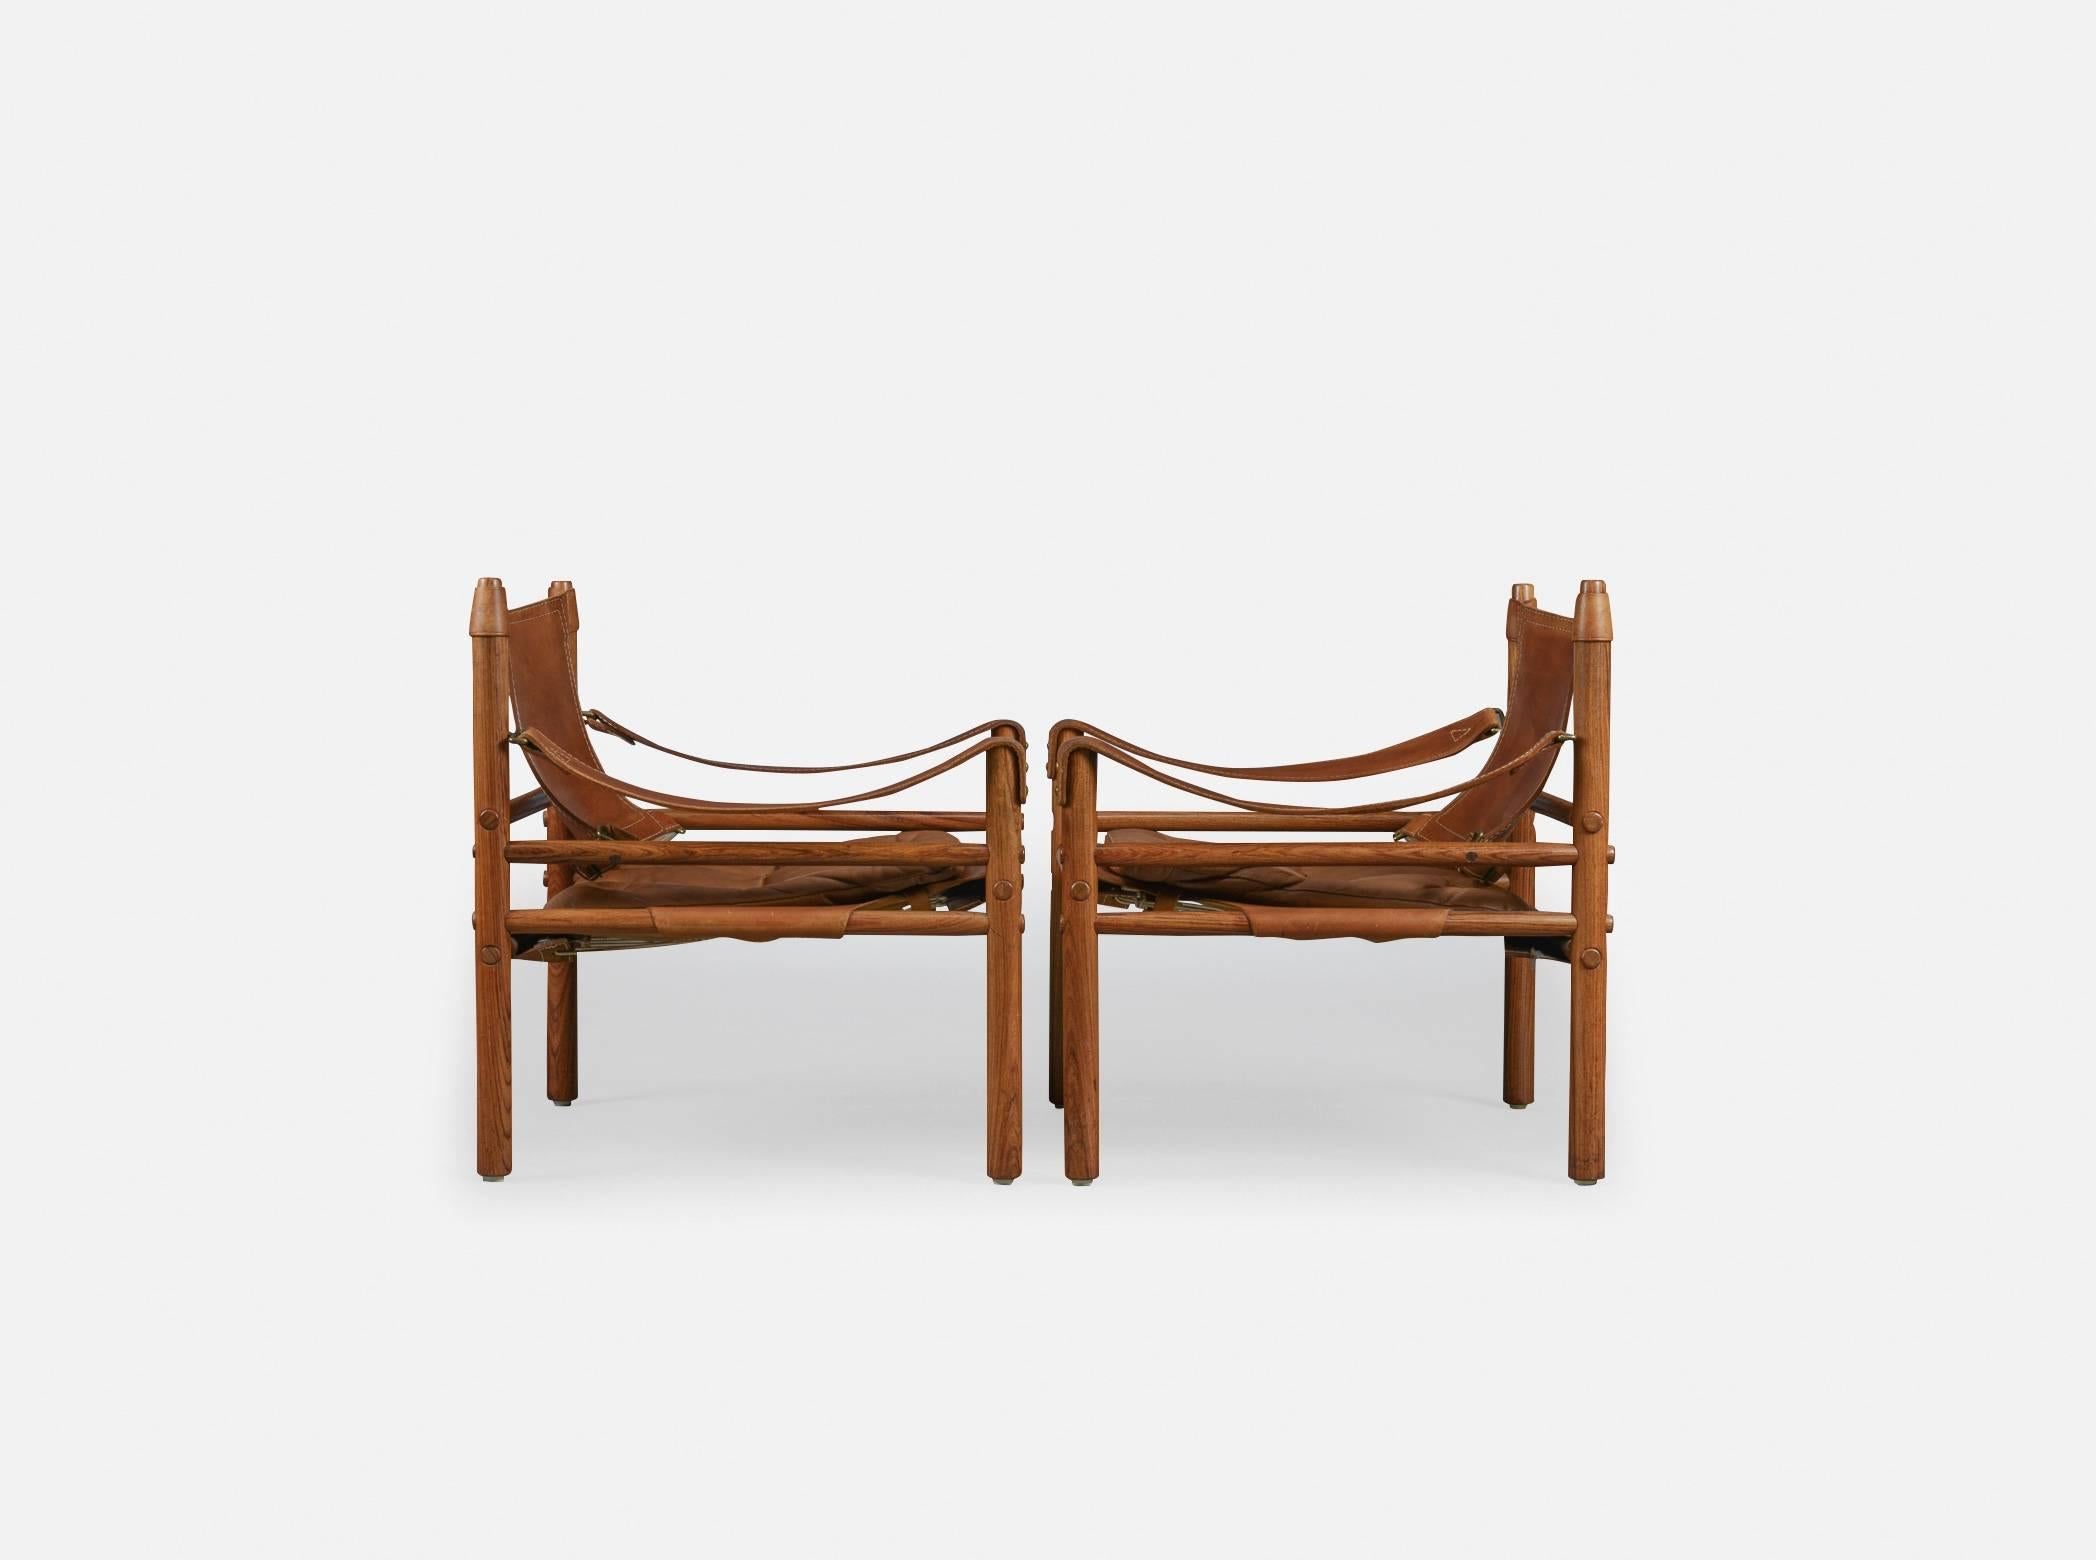 Swedish Pair of Arne Norell Safari 'Sirocco' Chairs, Aneby Mobler, Sweden, 1960s